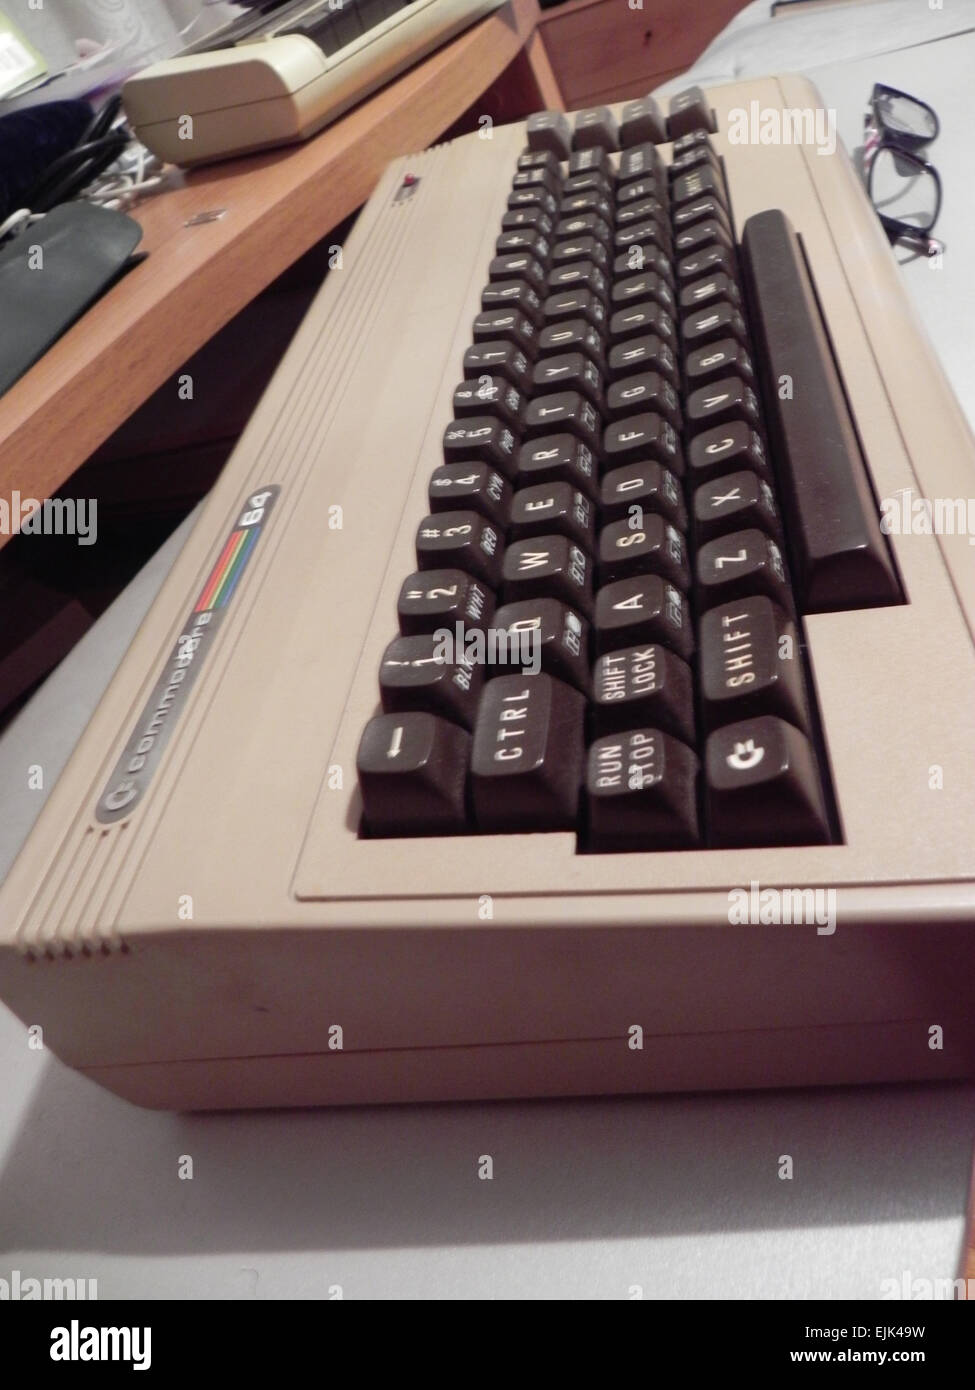 Trieste, TS, Italy - March 1, 2015: My dear old Commodore 64 emerged from the dust of the cellar Stock Photo